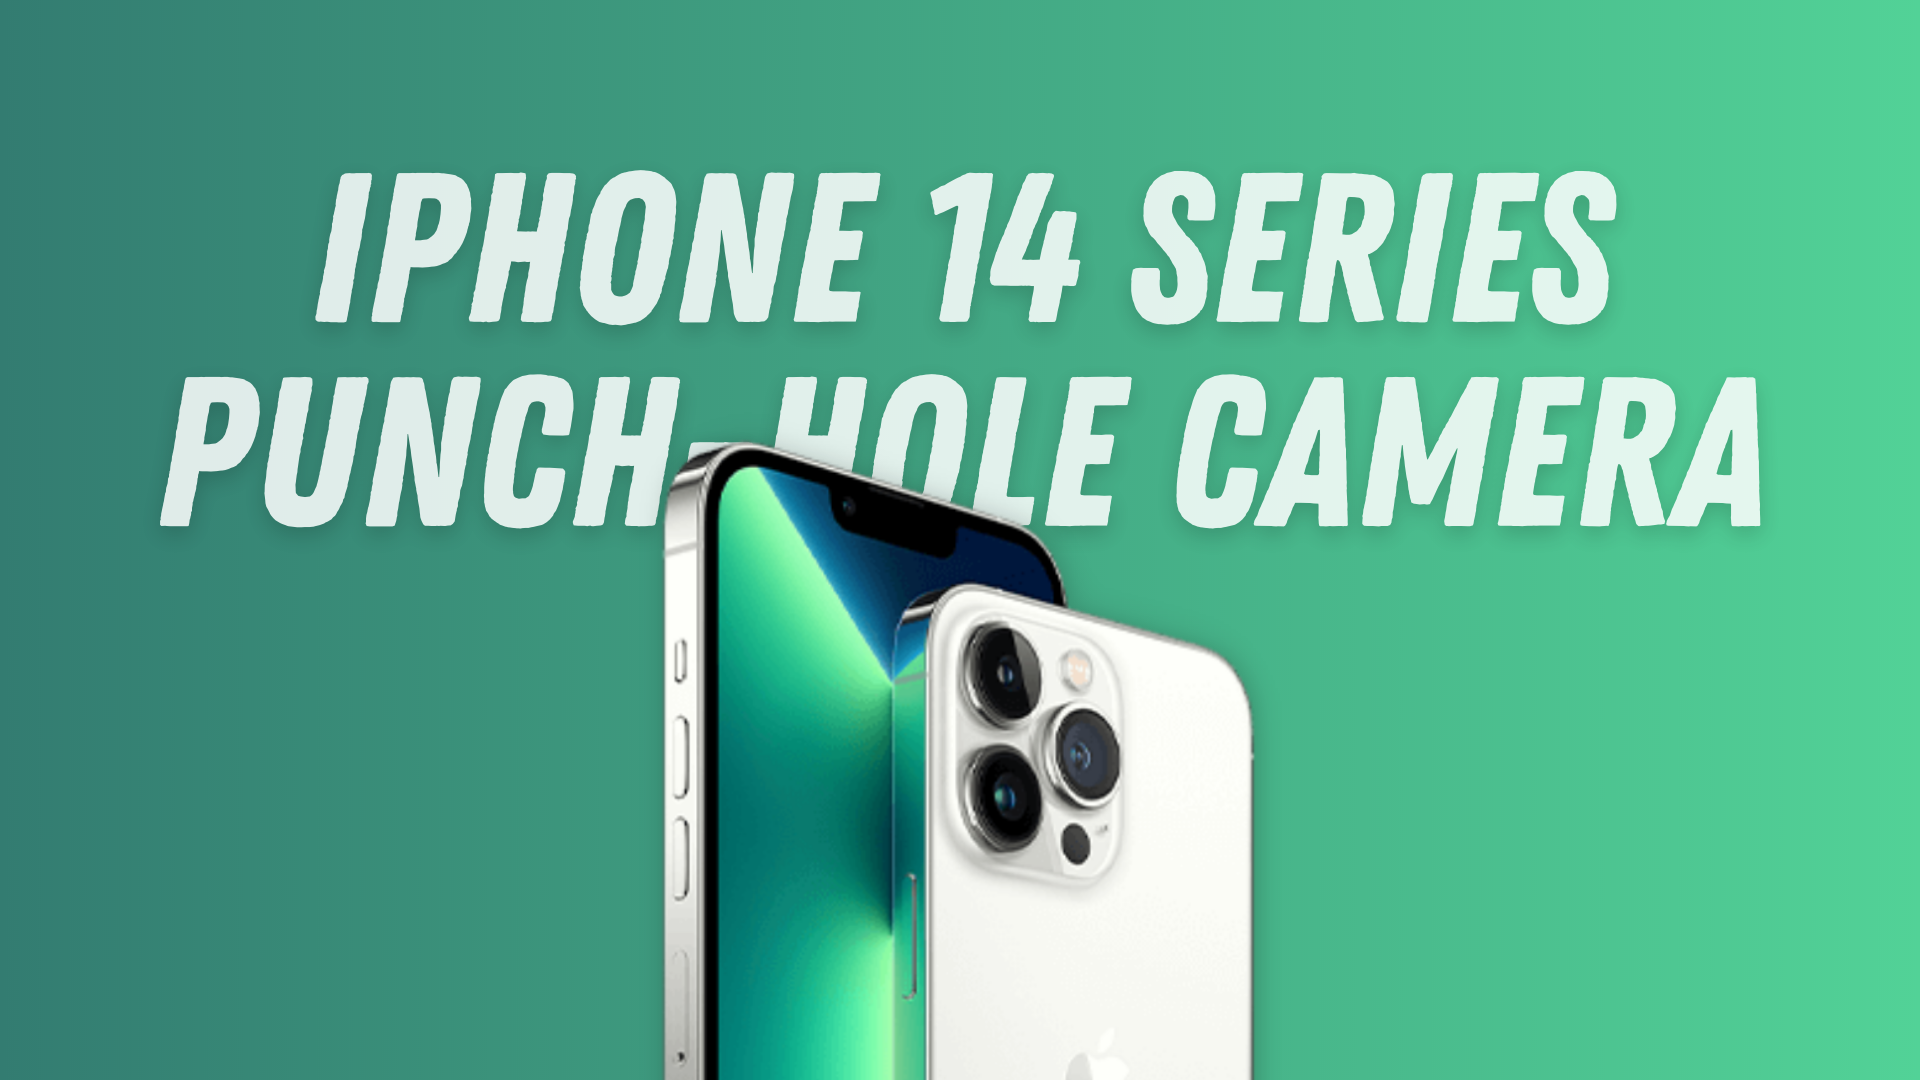 apple-iphone-14-pro-models-punch-hole-selfie-cameras-48mp-rear-camera-says-ming-chi-kuo-truetech-true-tech